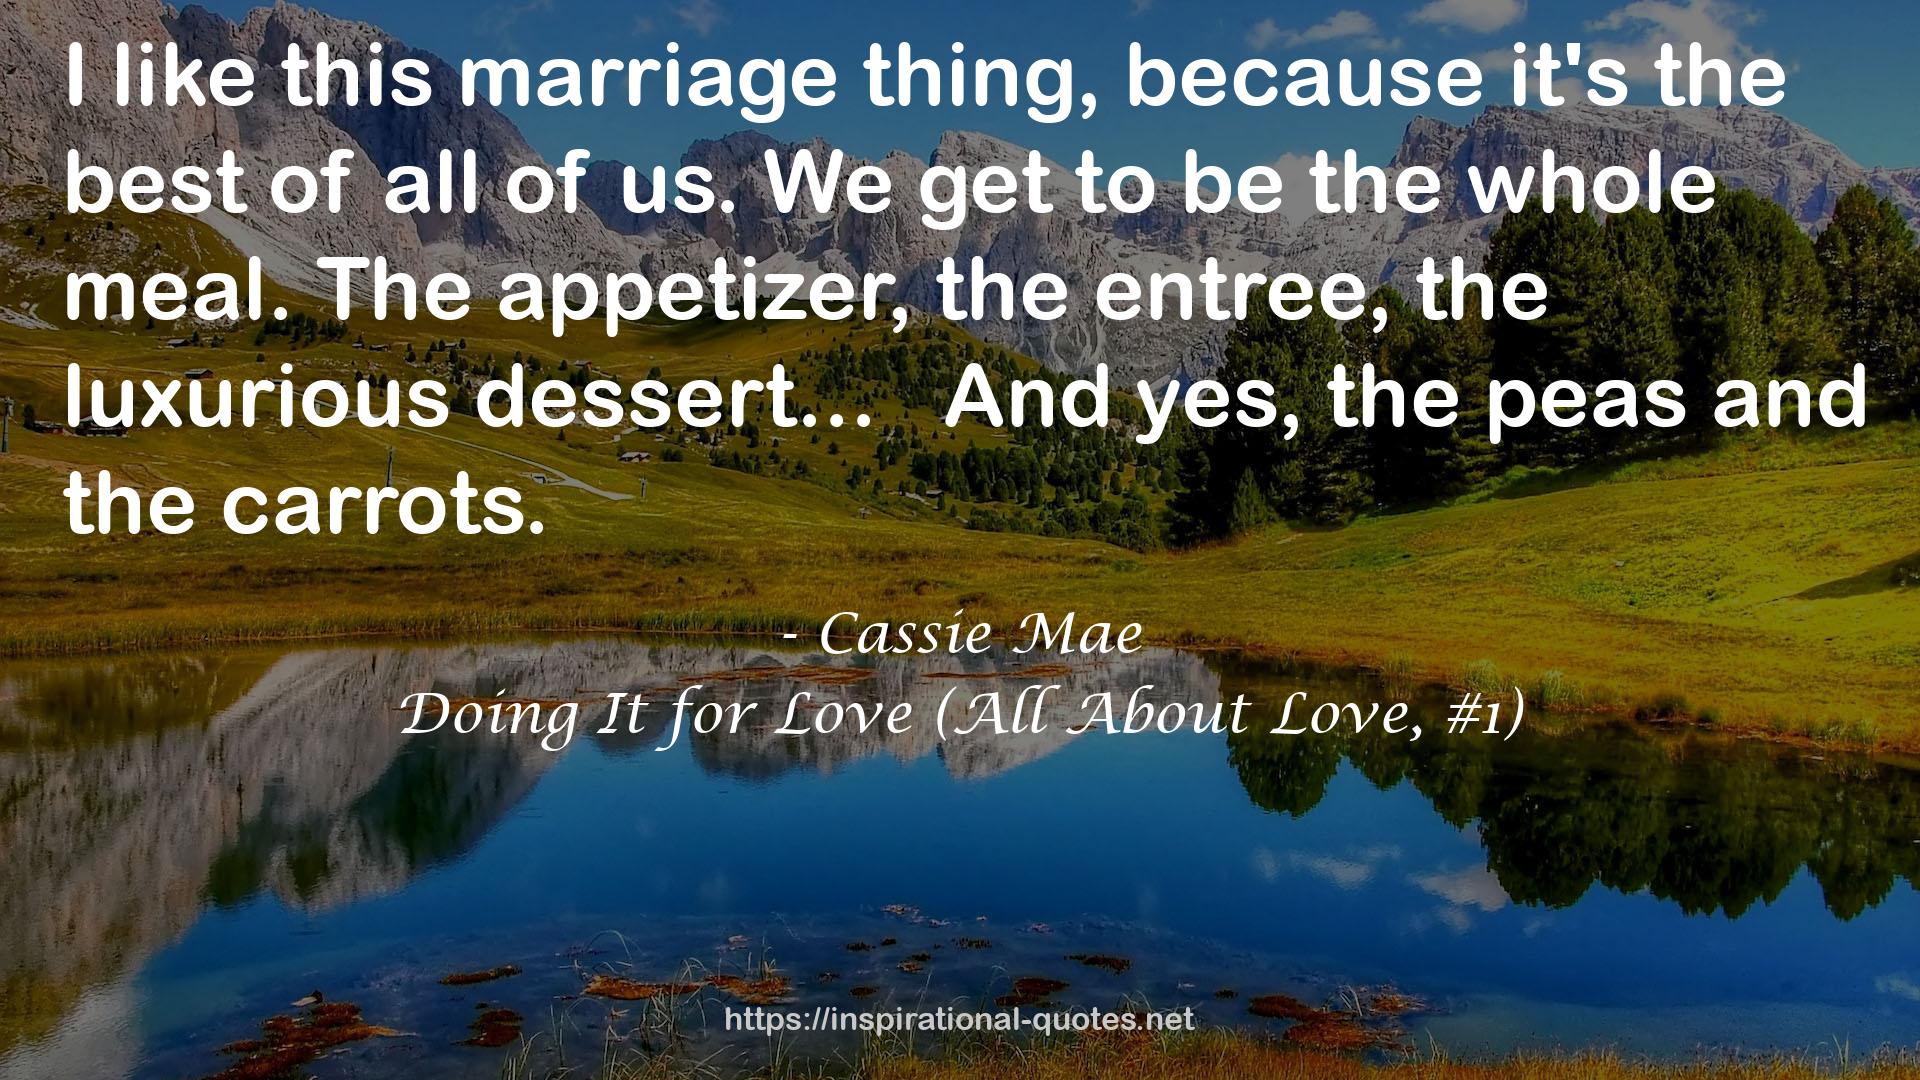 Doing It for Love (All About Love, #1) QUOTES